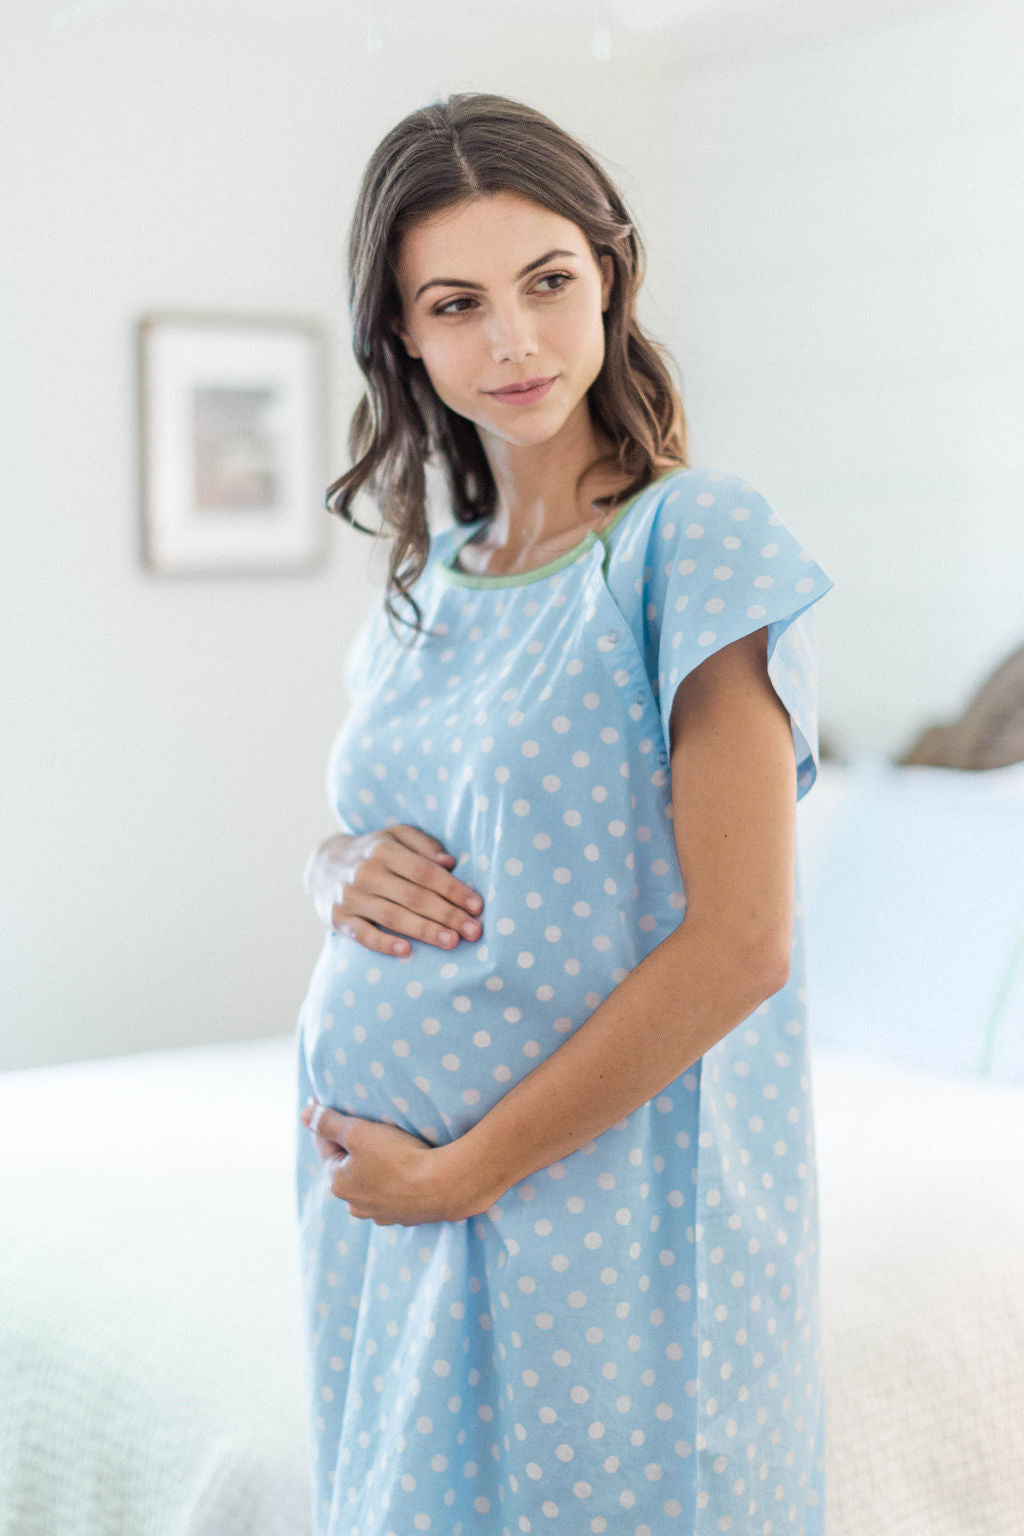 Nicole Gownie Baby Be Mine Maternity Delivery Labor Hospital Gown Blue Dots  – Gownies™